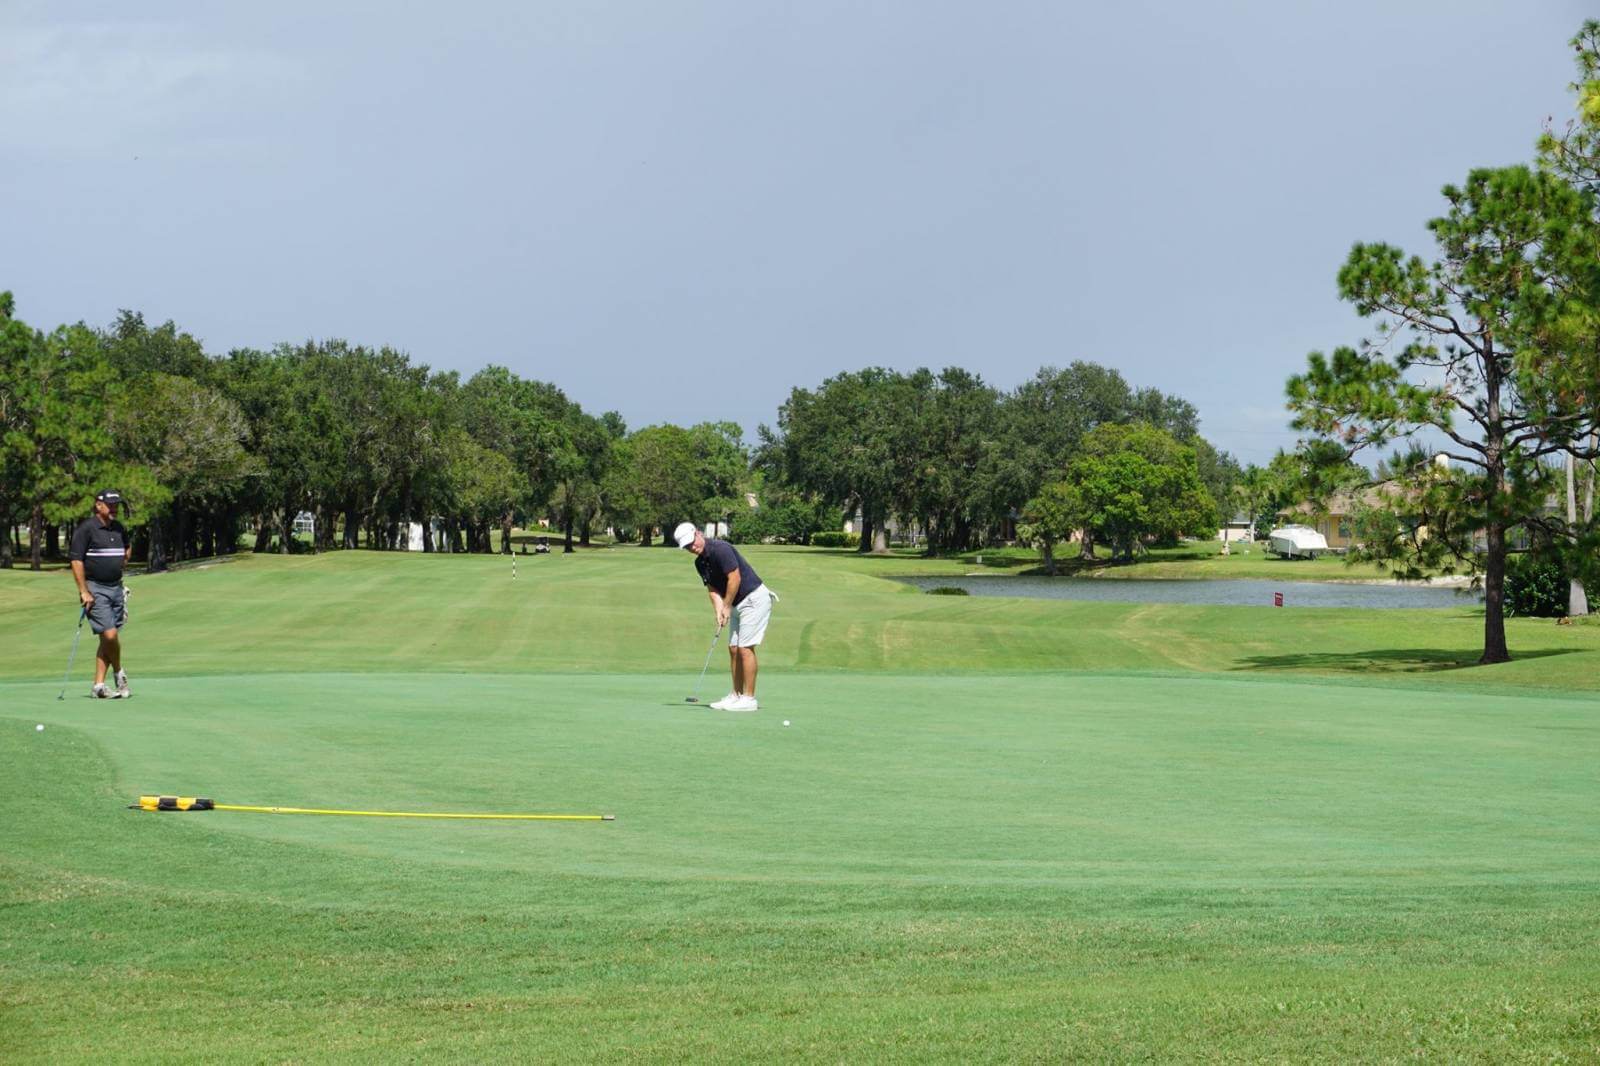 Newly renovated greens, the areas largest practice facility, golf carts with GPS and touchscreen monitors, Coral Oaks Golf Course is a top golf course for Fort Myers, Florida residents and visitors. Must Do Visitor Guides. 